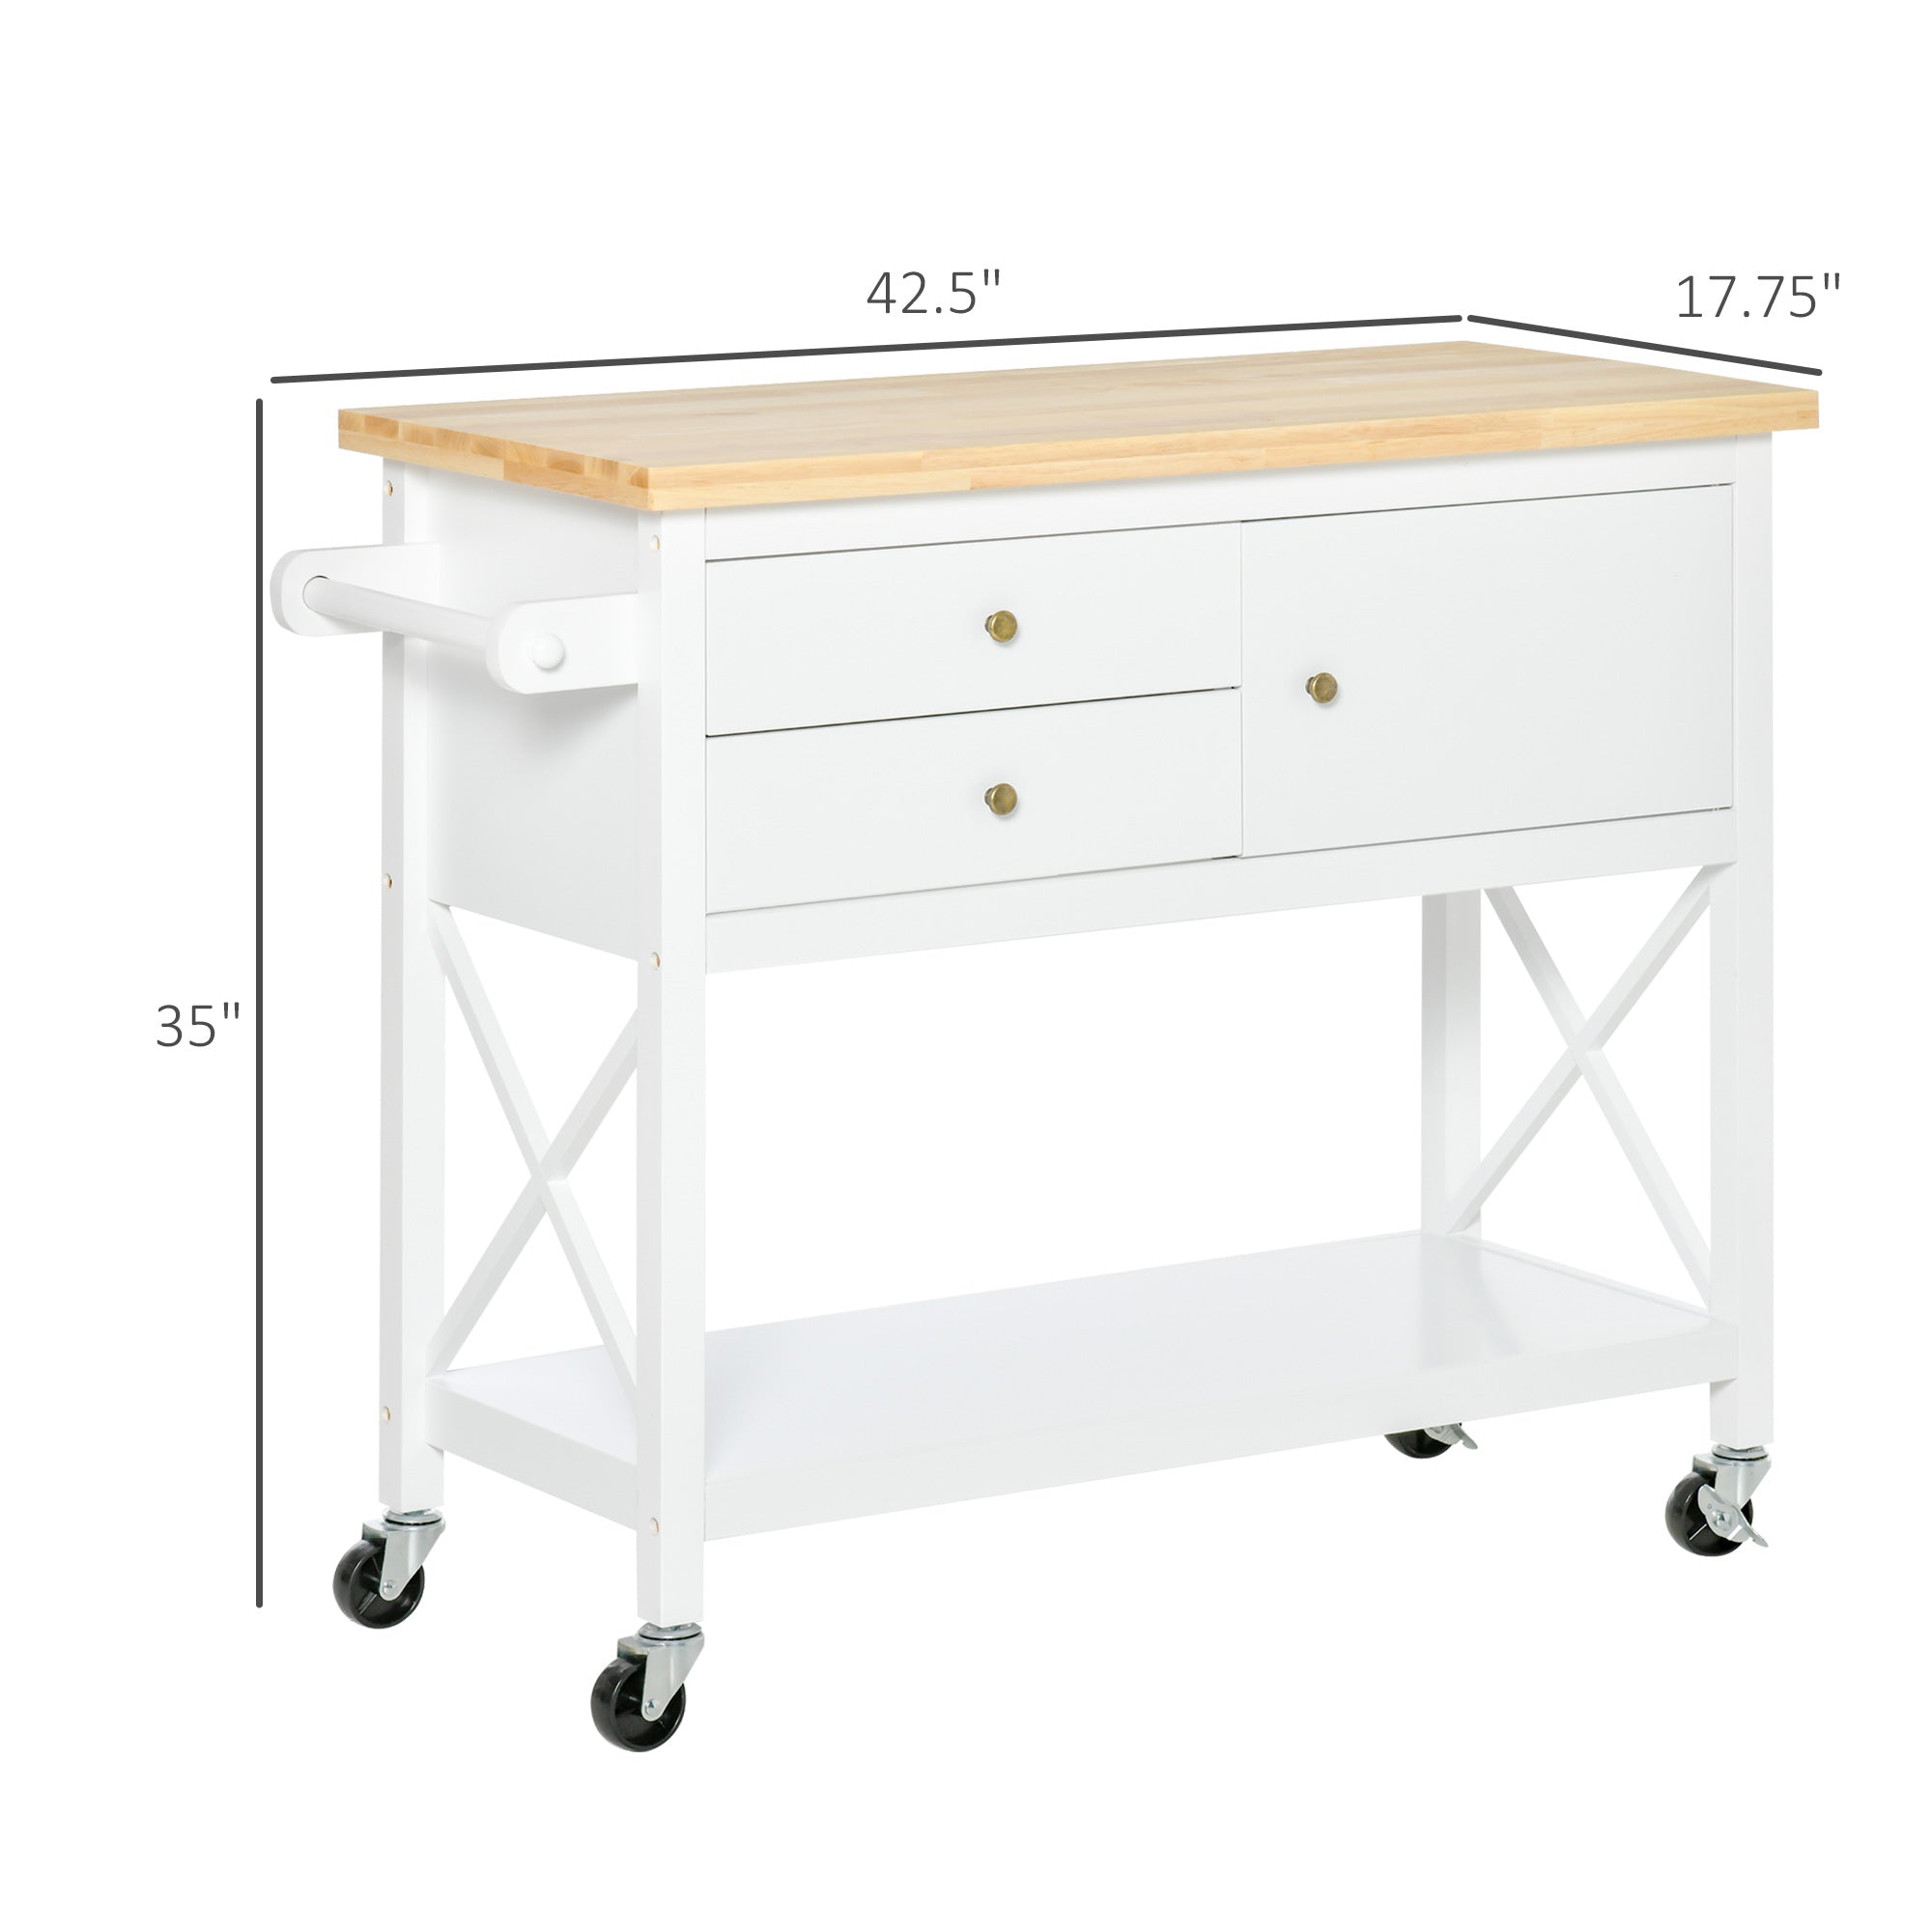 HomCom Utility Kitchen Cart Rolling Kitchen Island Storage Trolley with Rubberwood Top， 2 Drawers， Towel Rack， White